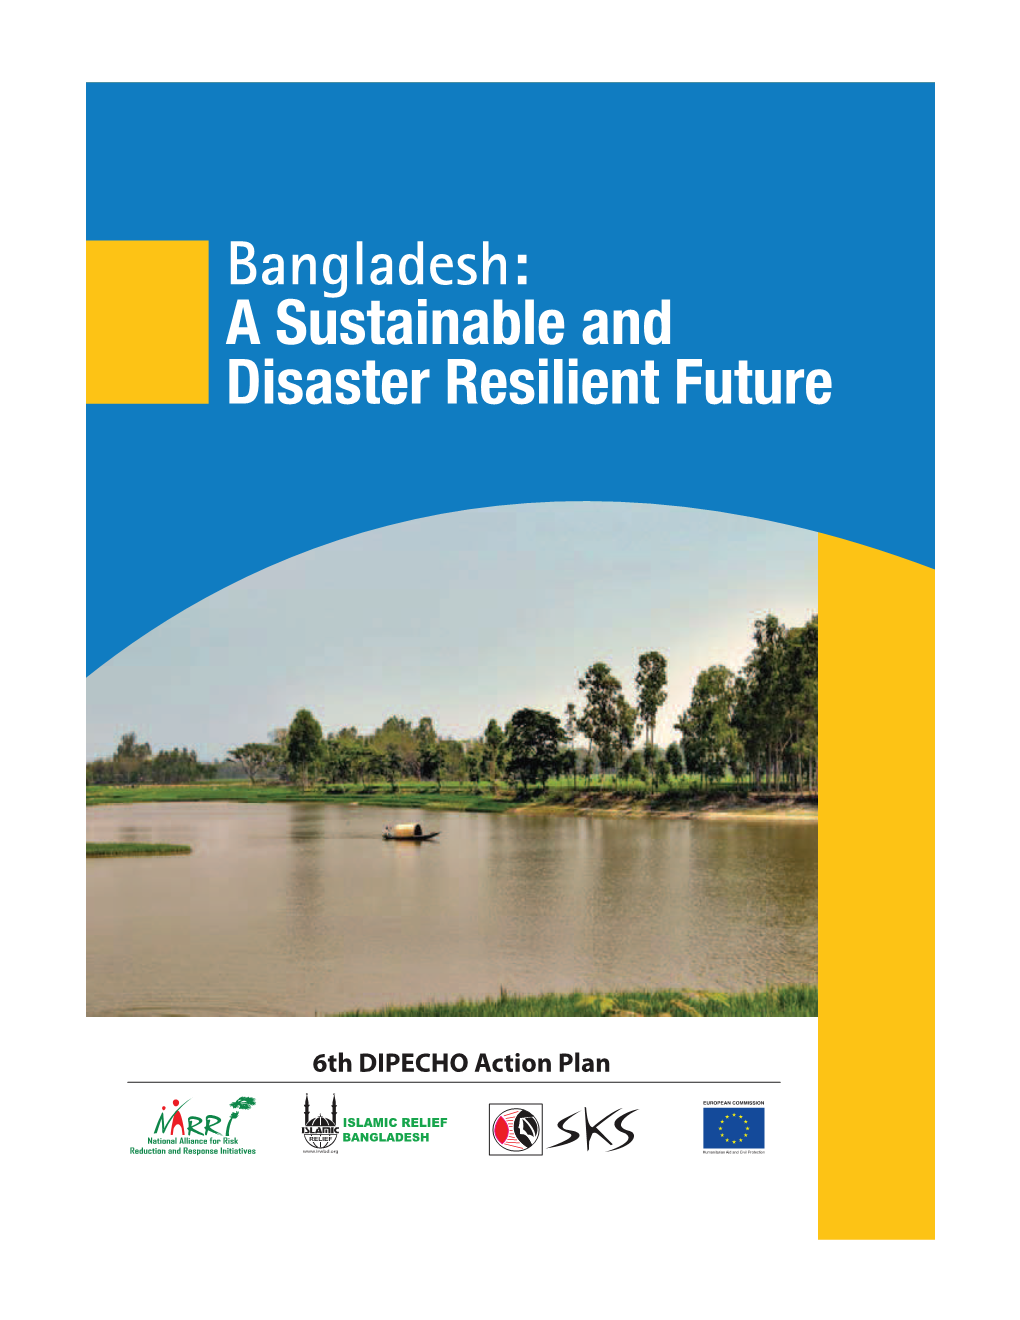 Bangladesh: a Sustainable and Disaster Resilient Future